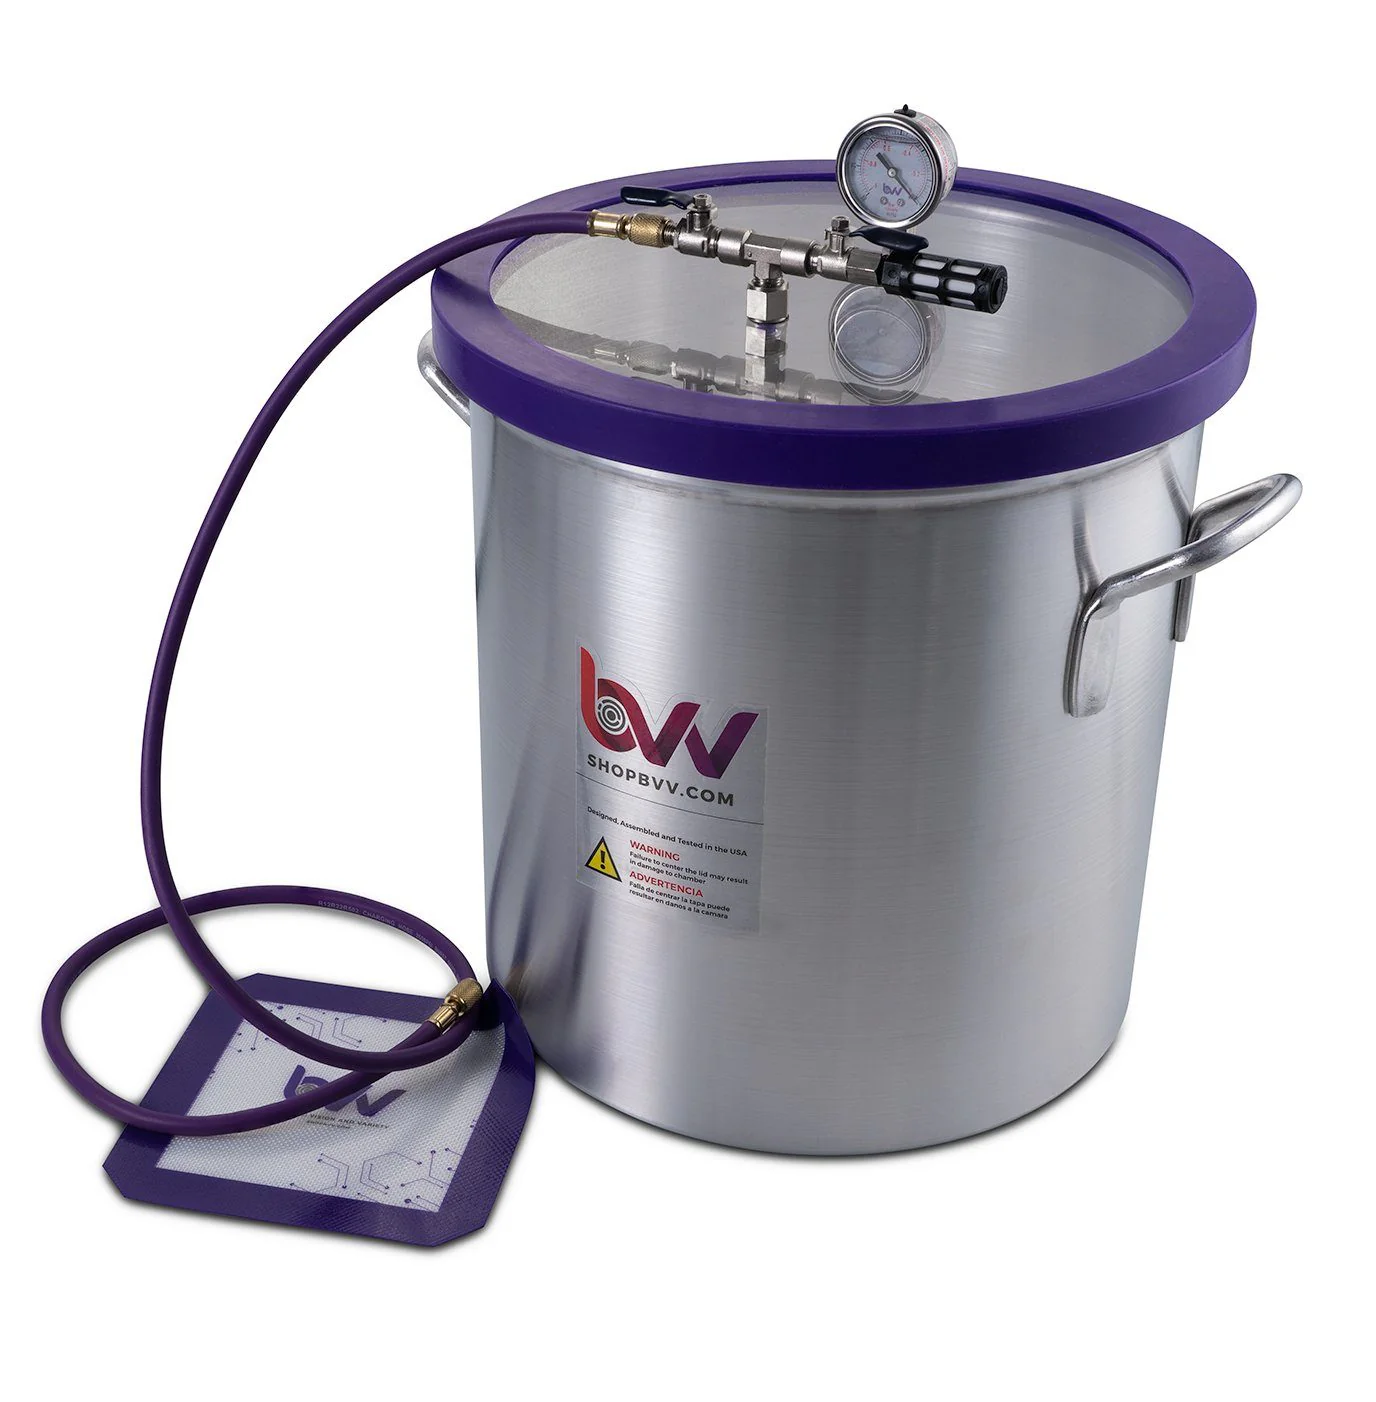 What size vacuum pump is required for the 10 gallon chamber